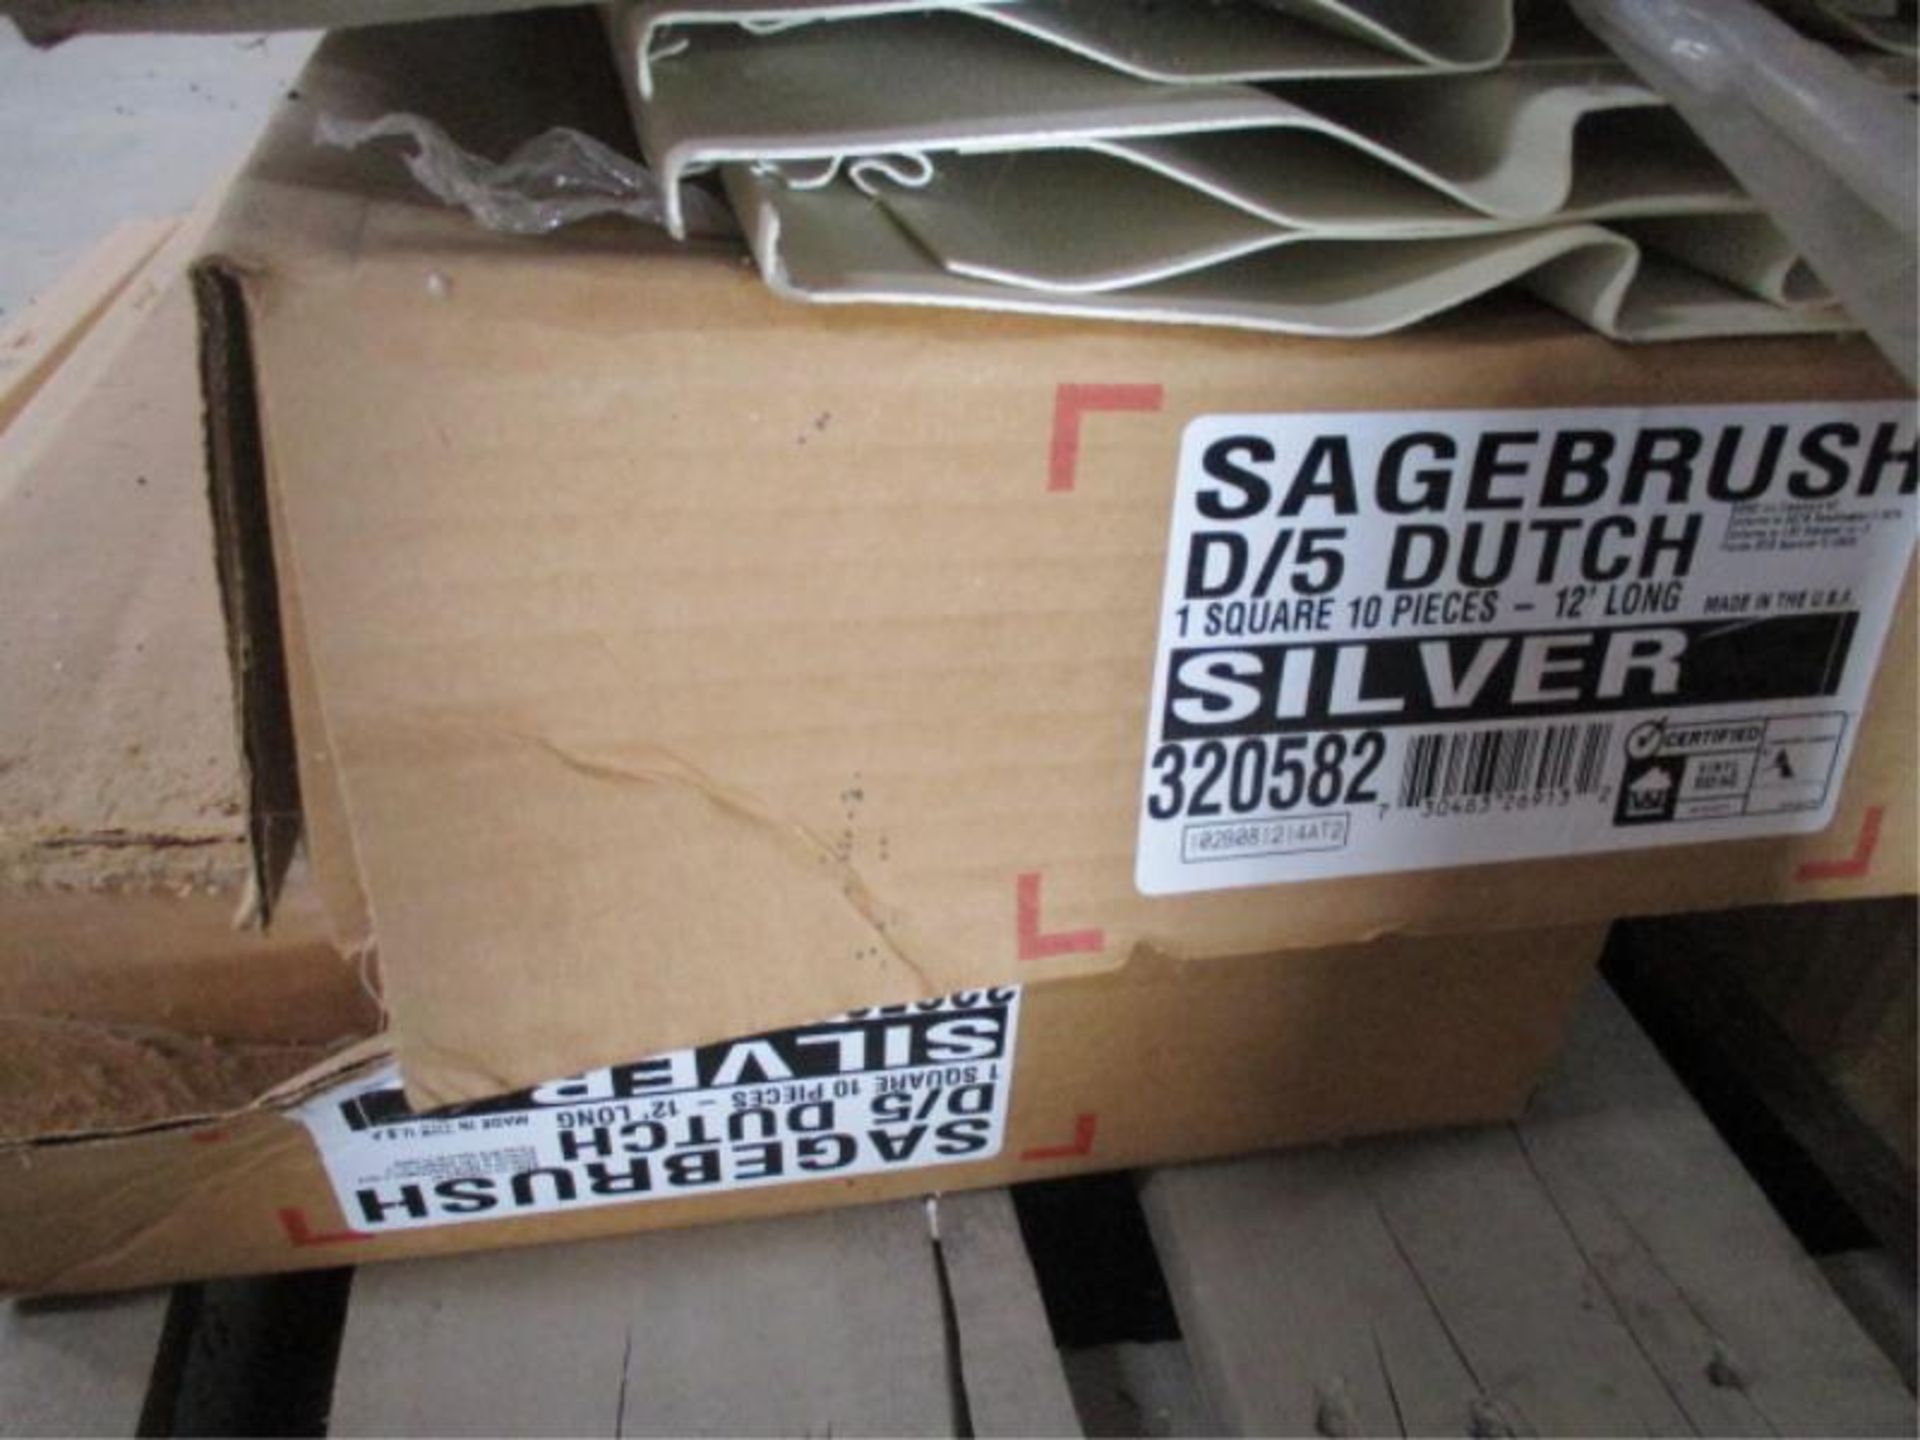 3 Boxes Chesapeake Bay Dutch Lap 4.5 in by 12Ft Harbor Gray, 2 Boxes D/S Sagebrush Dutch Silver # - Image 3 of 5